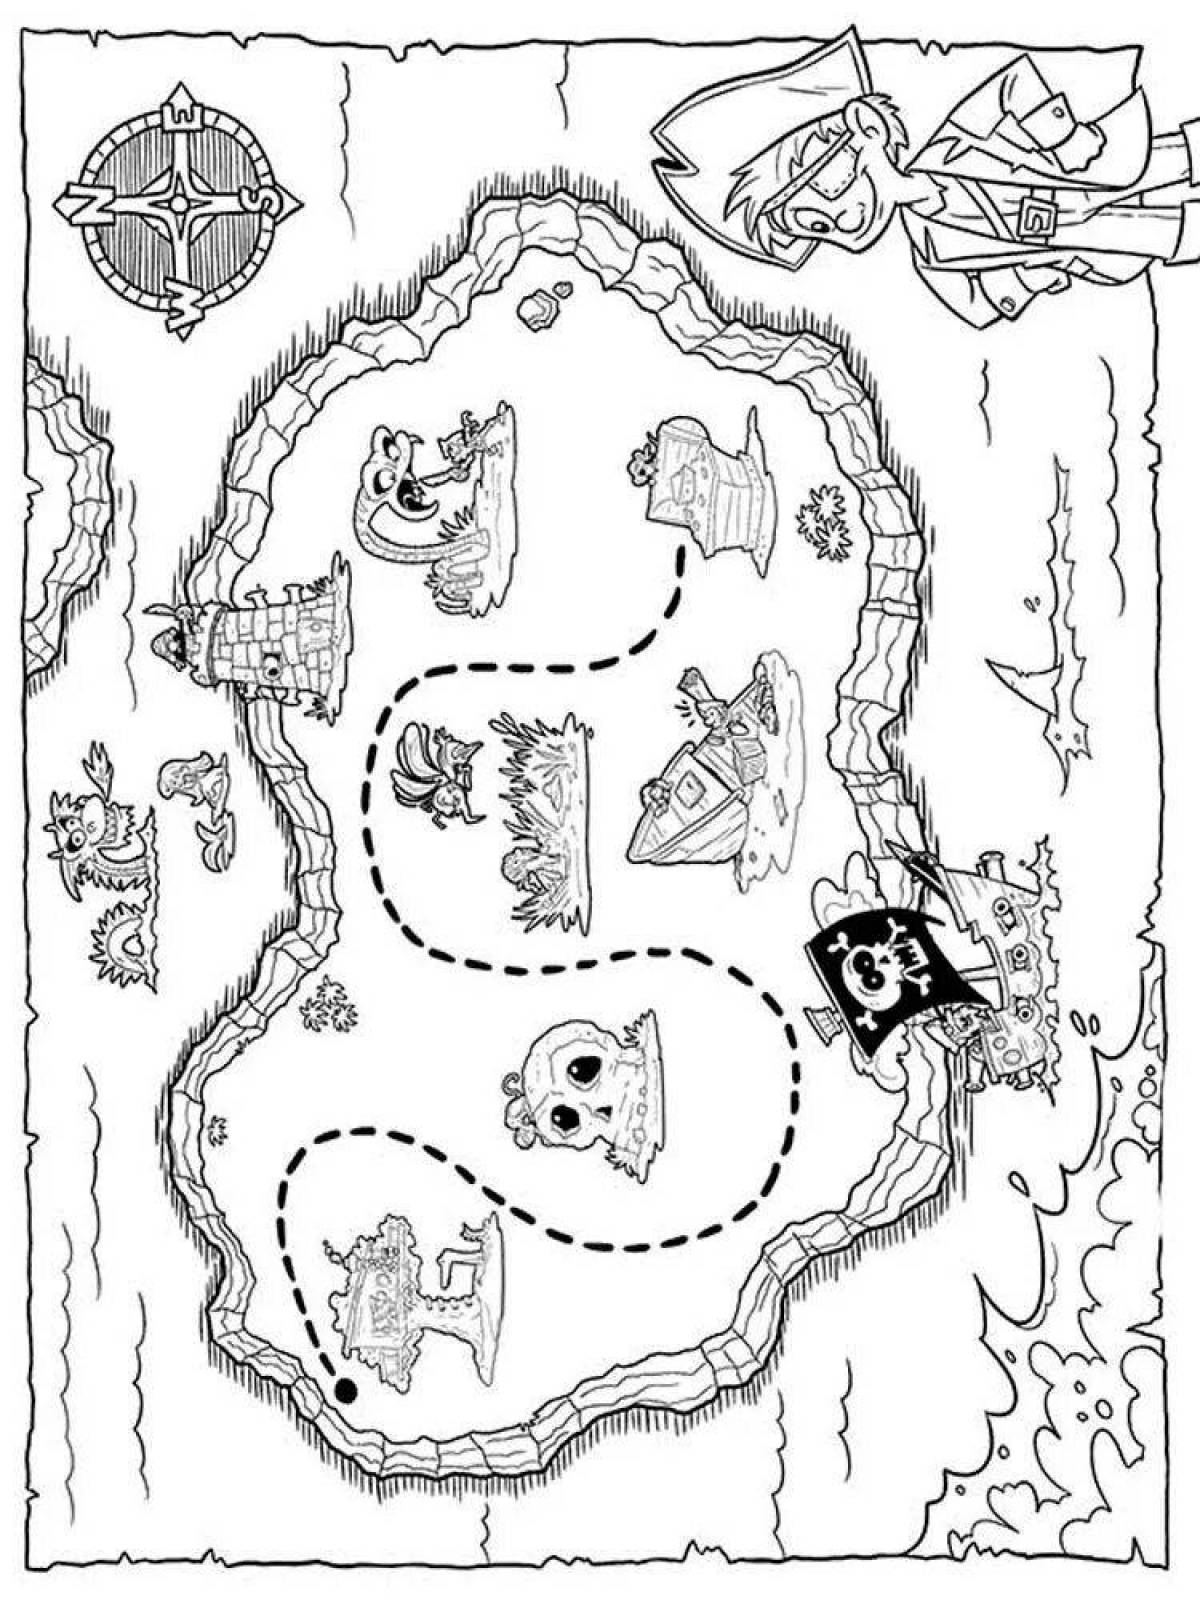 Great pirate map coloring book